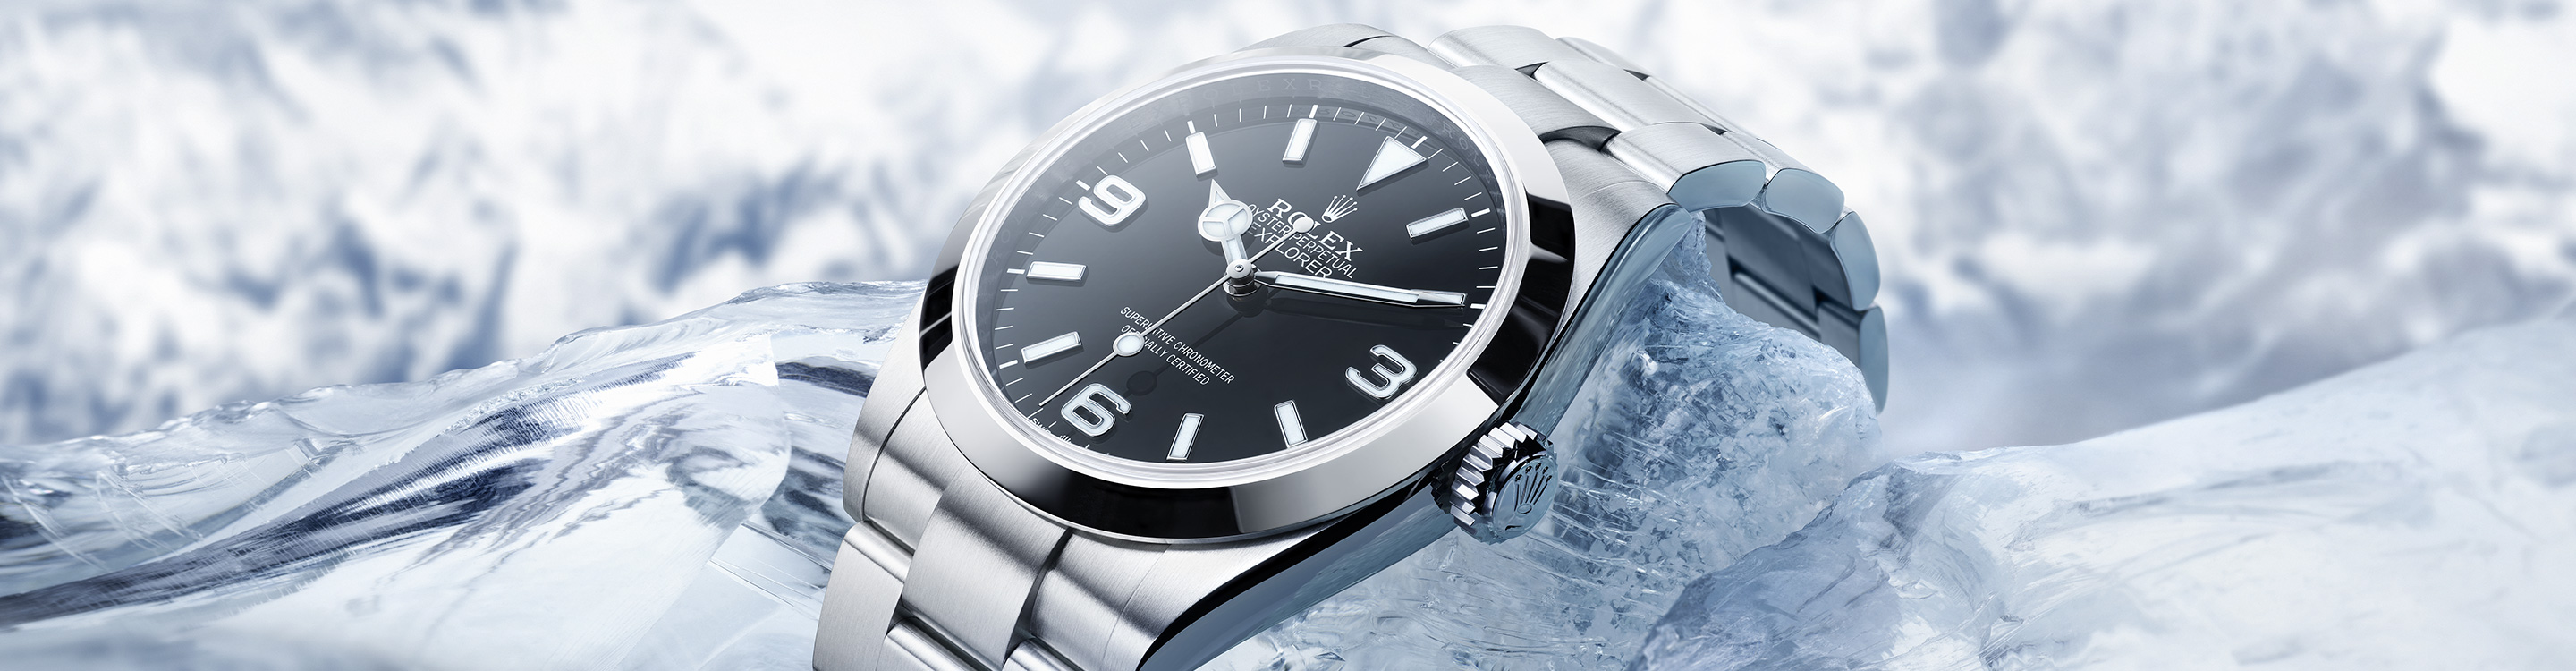 Dial Rolex Explorer II Oystersteel and Black Dial in Grassy